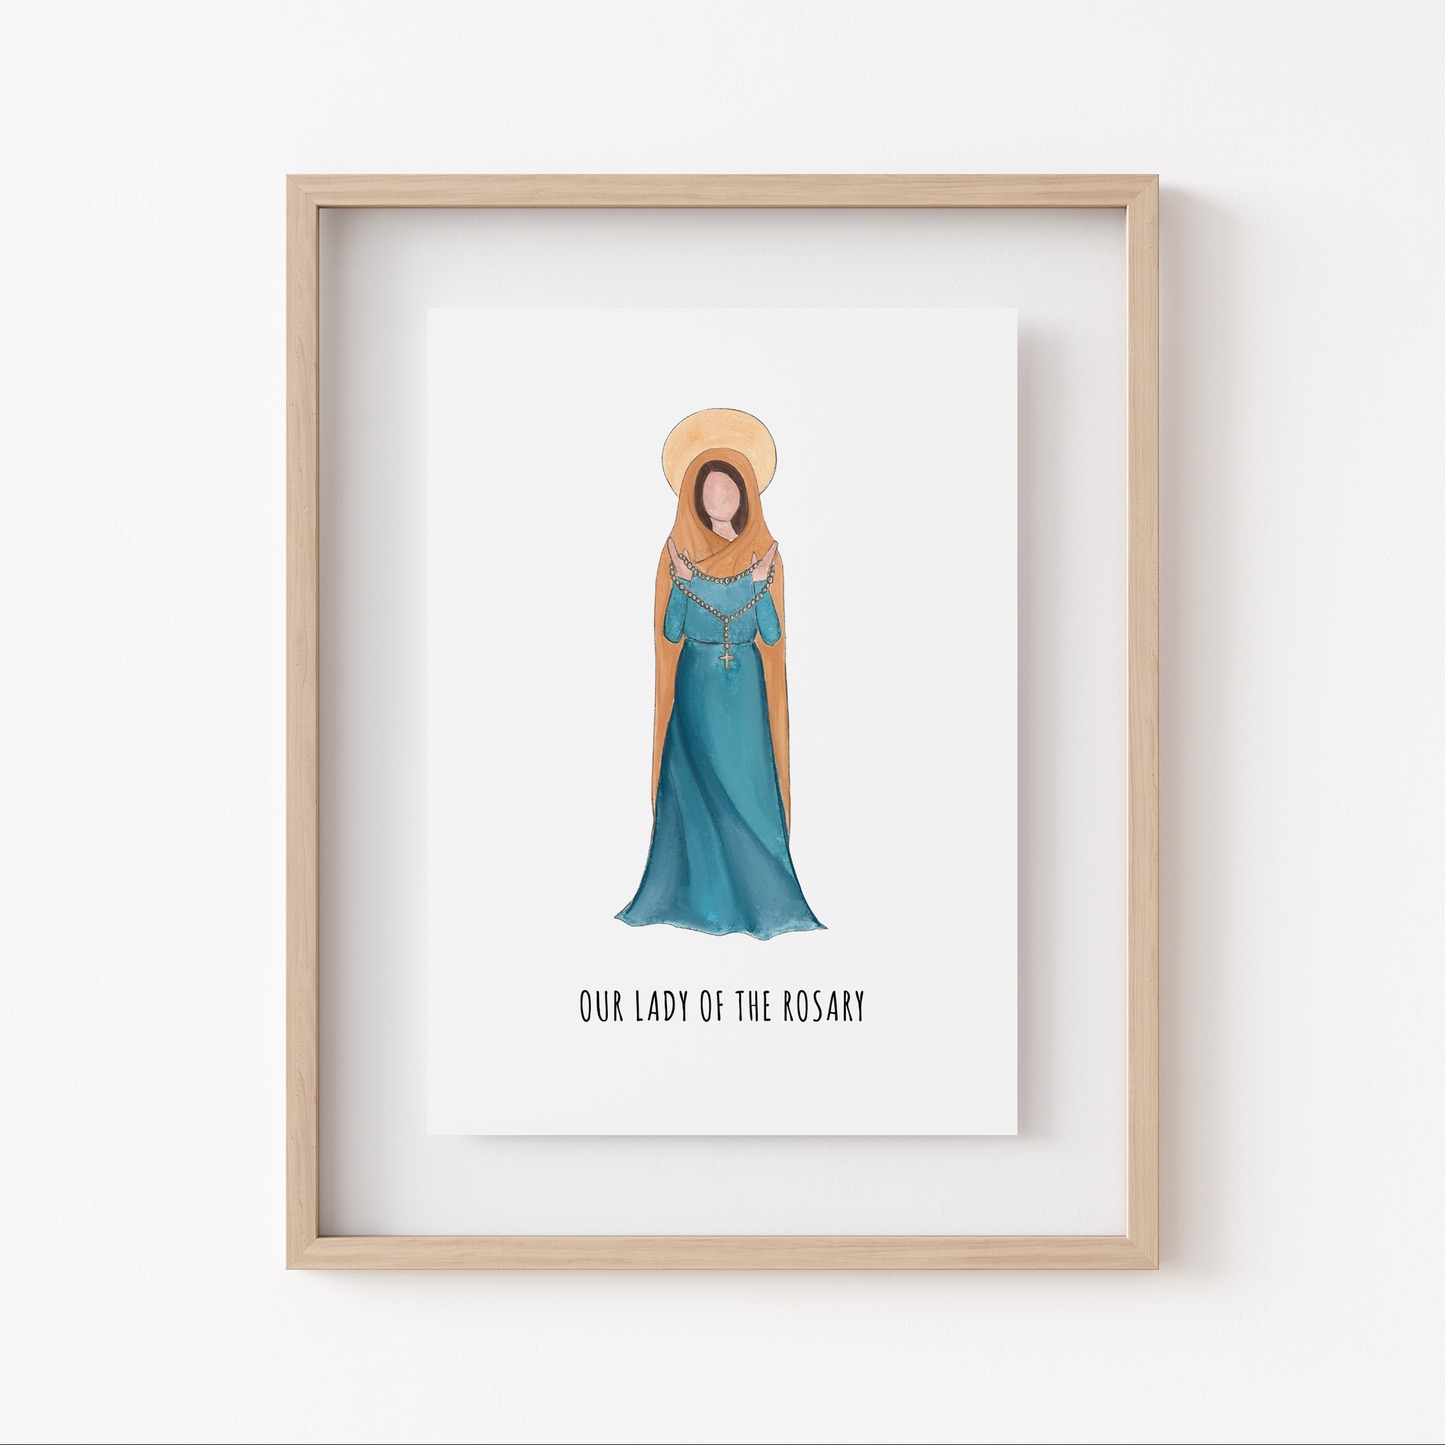 Marian Minis - Our Lady of the Rosary